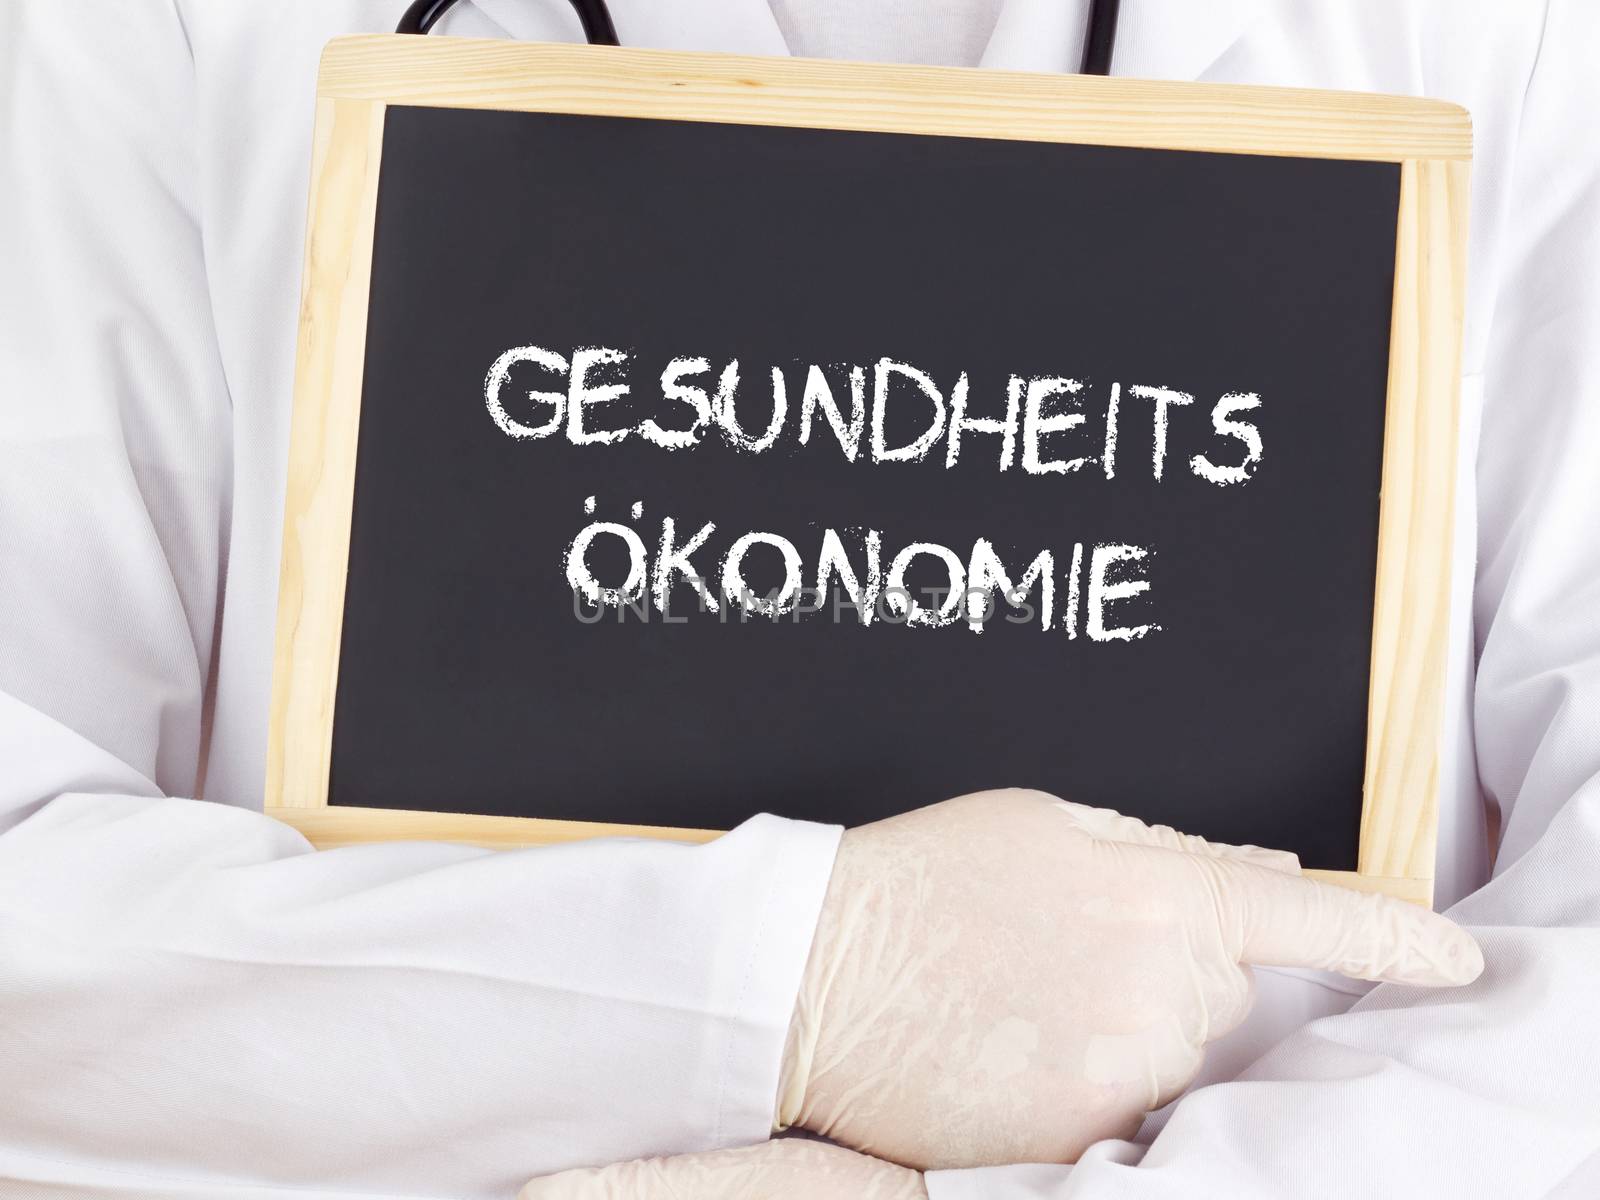 Doctor shows information: health economics in german by gwolters